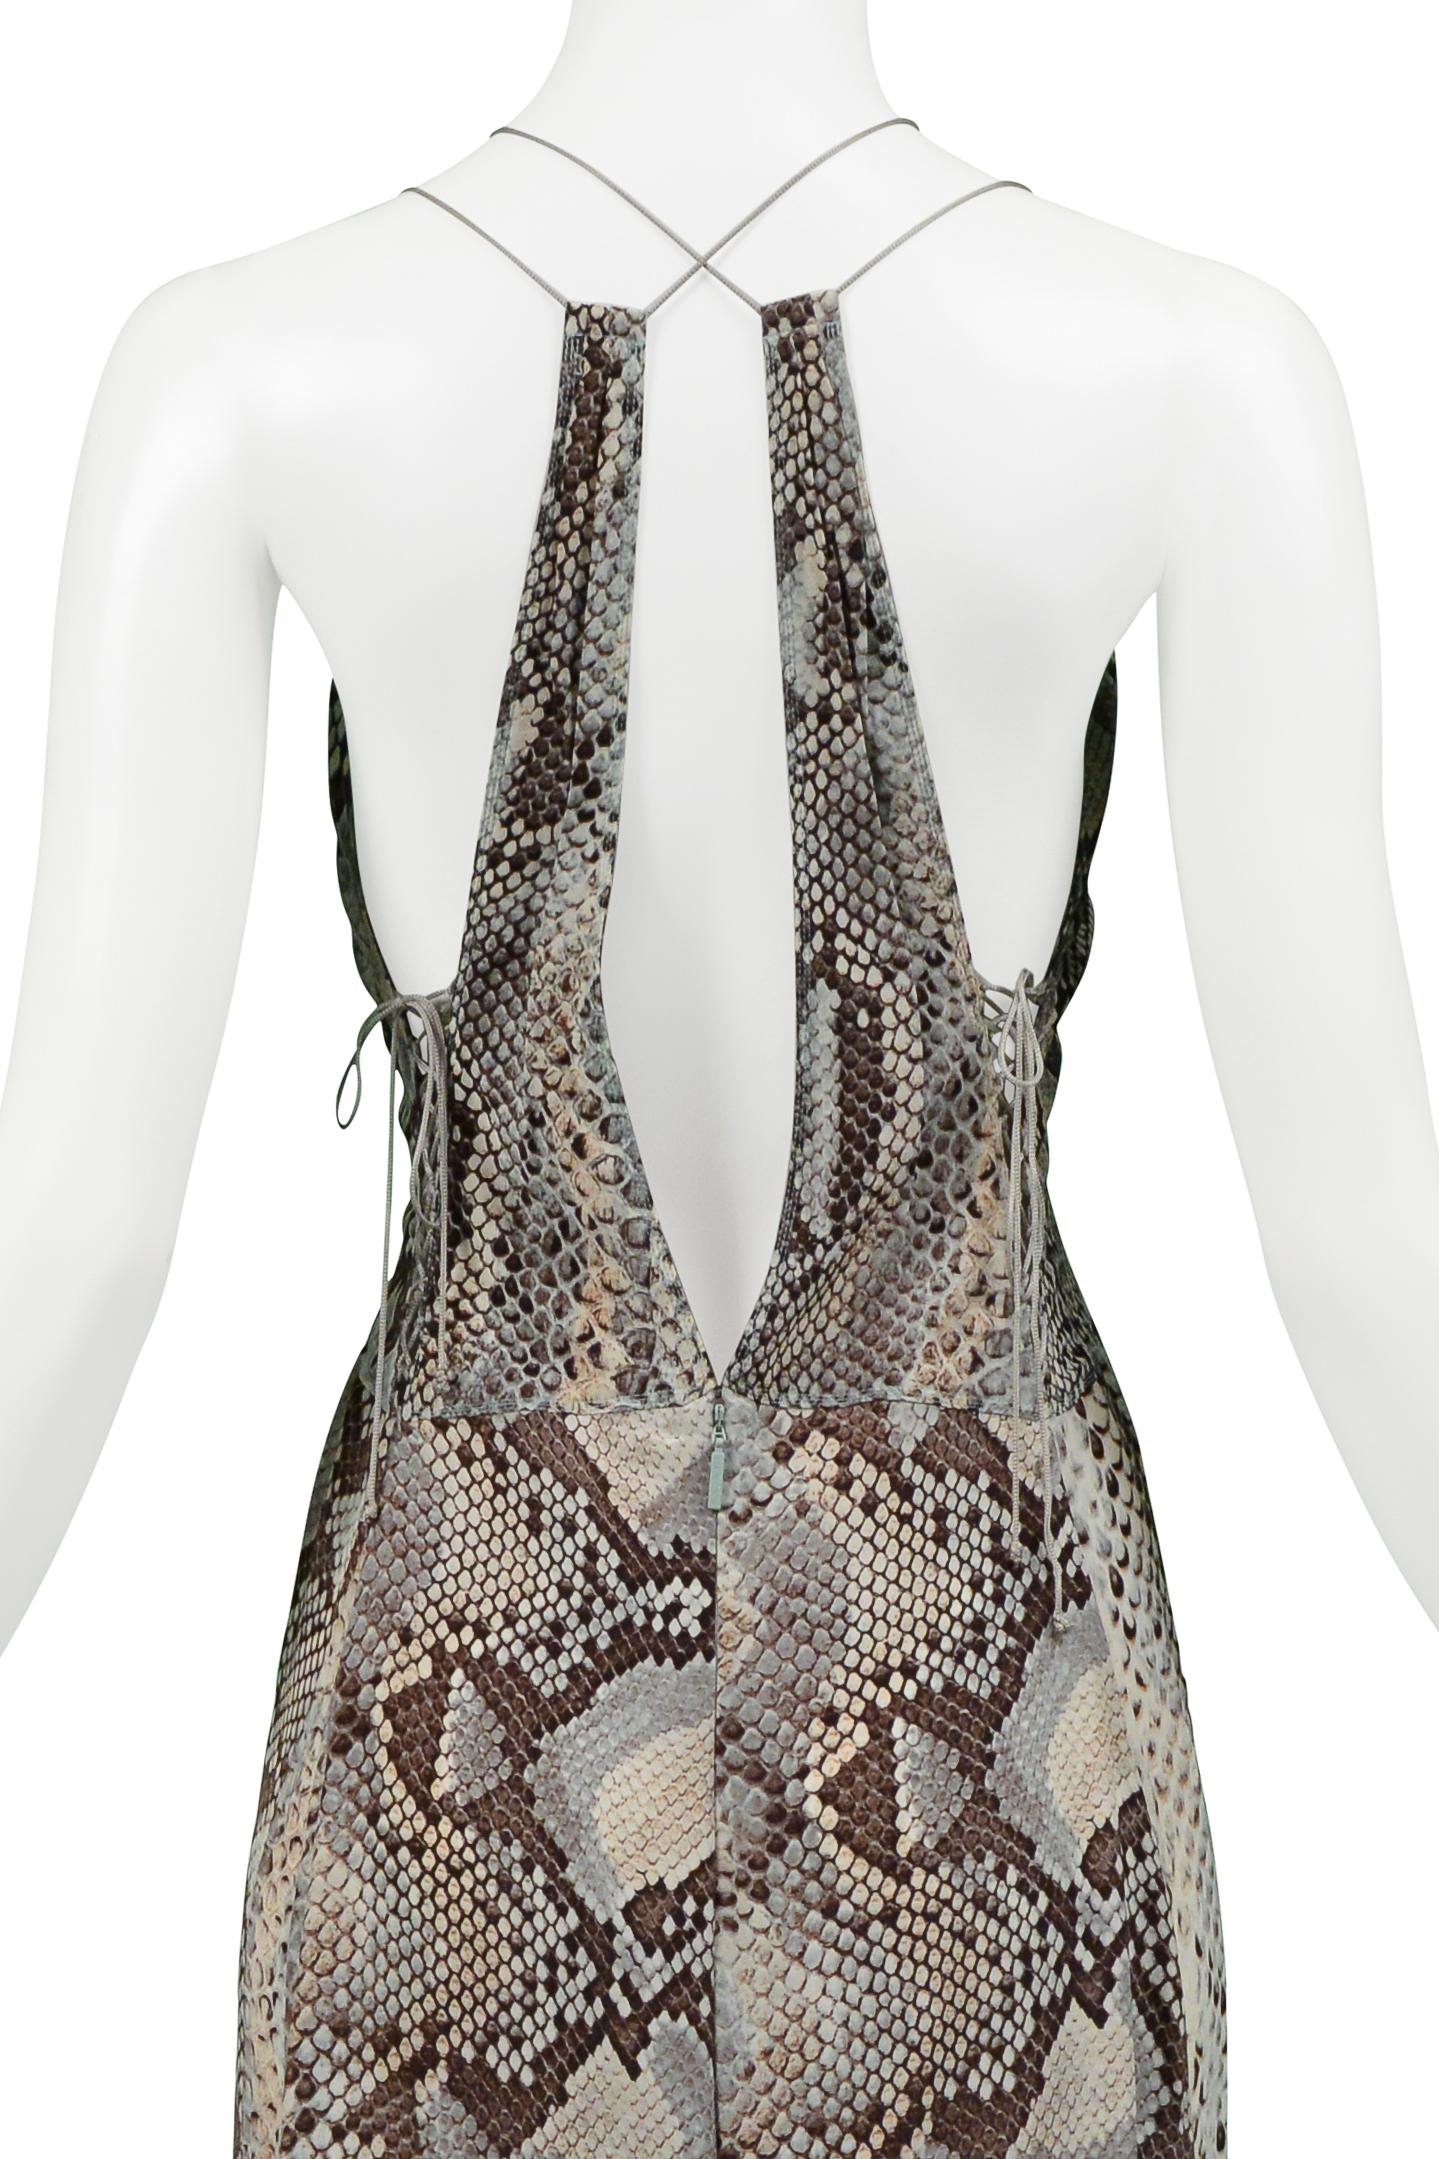 Roberto Cavalli Blue & Grey Snake Print Evening Gown With Silver Hardware 2011 For Sale 4